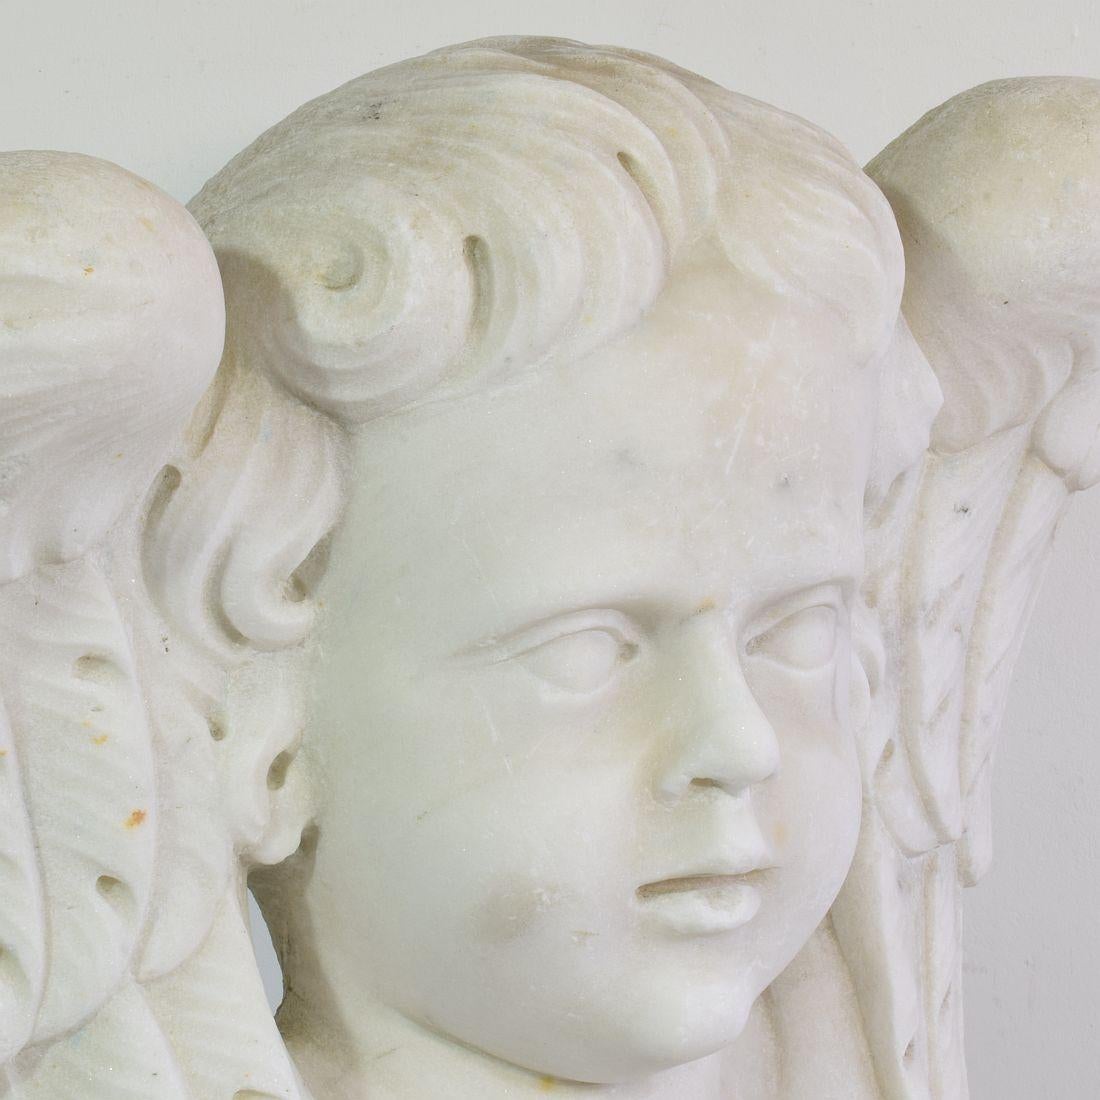 Italian, 17th / 18th Century Carved White Marble Winged Angel Head Ornament For Sale 3